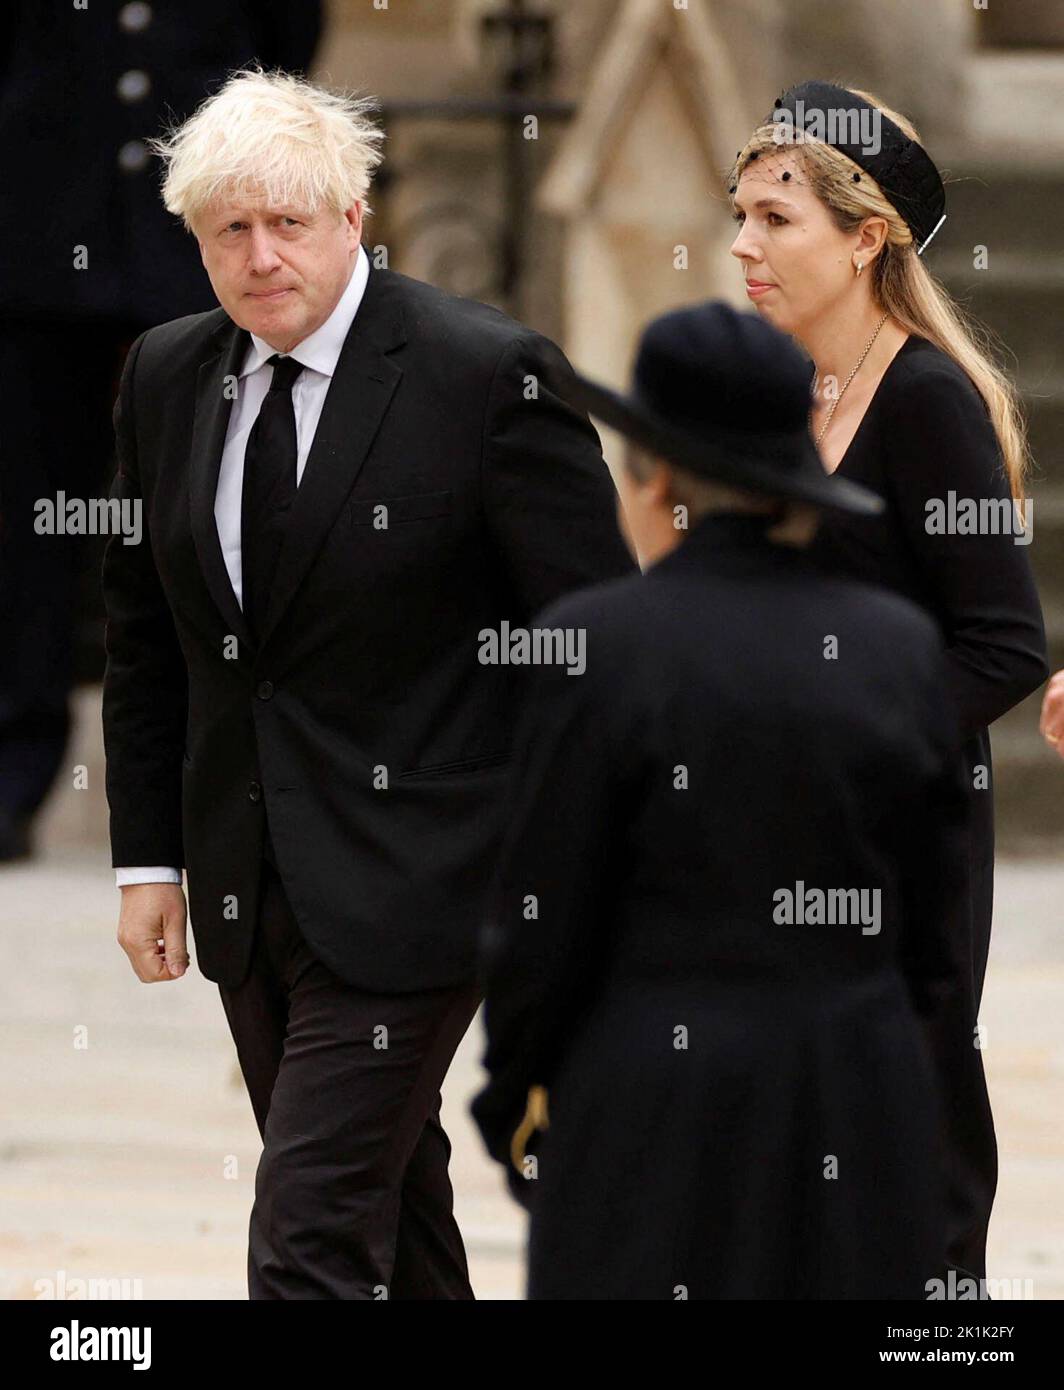 Former British Prime Minister Boris Johnson and his wife Carrie Johnson arrive at Westminster Abbey, on the day of the state funeral and burial of Britain's Queen Elizabeth, in London, Britain, September 19, 2022  REUTERS/John Sibley Stock Photo